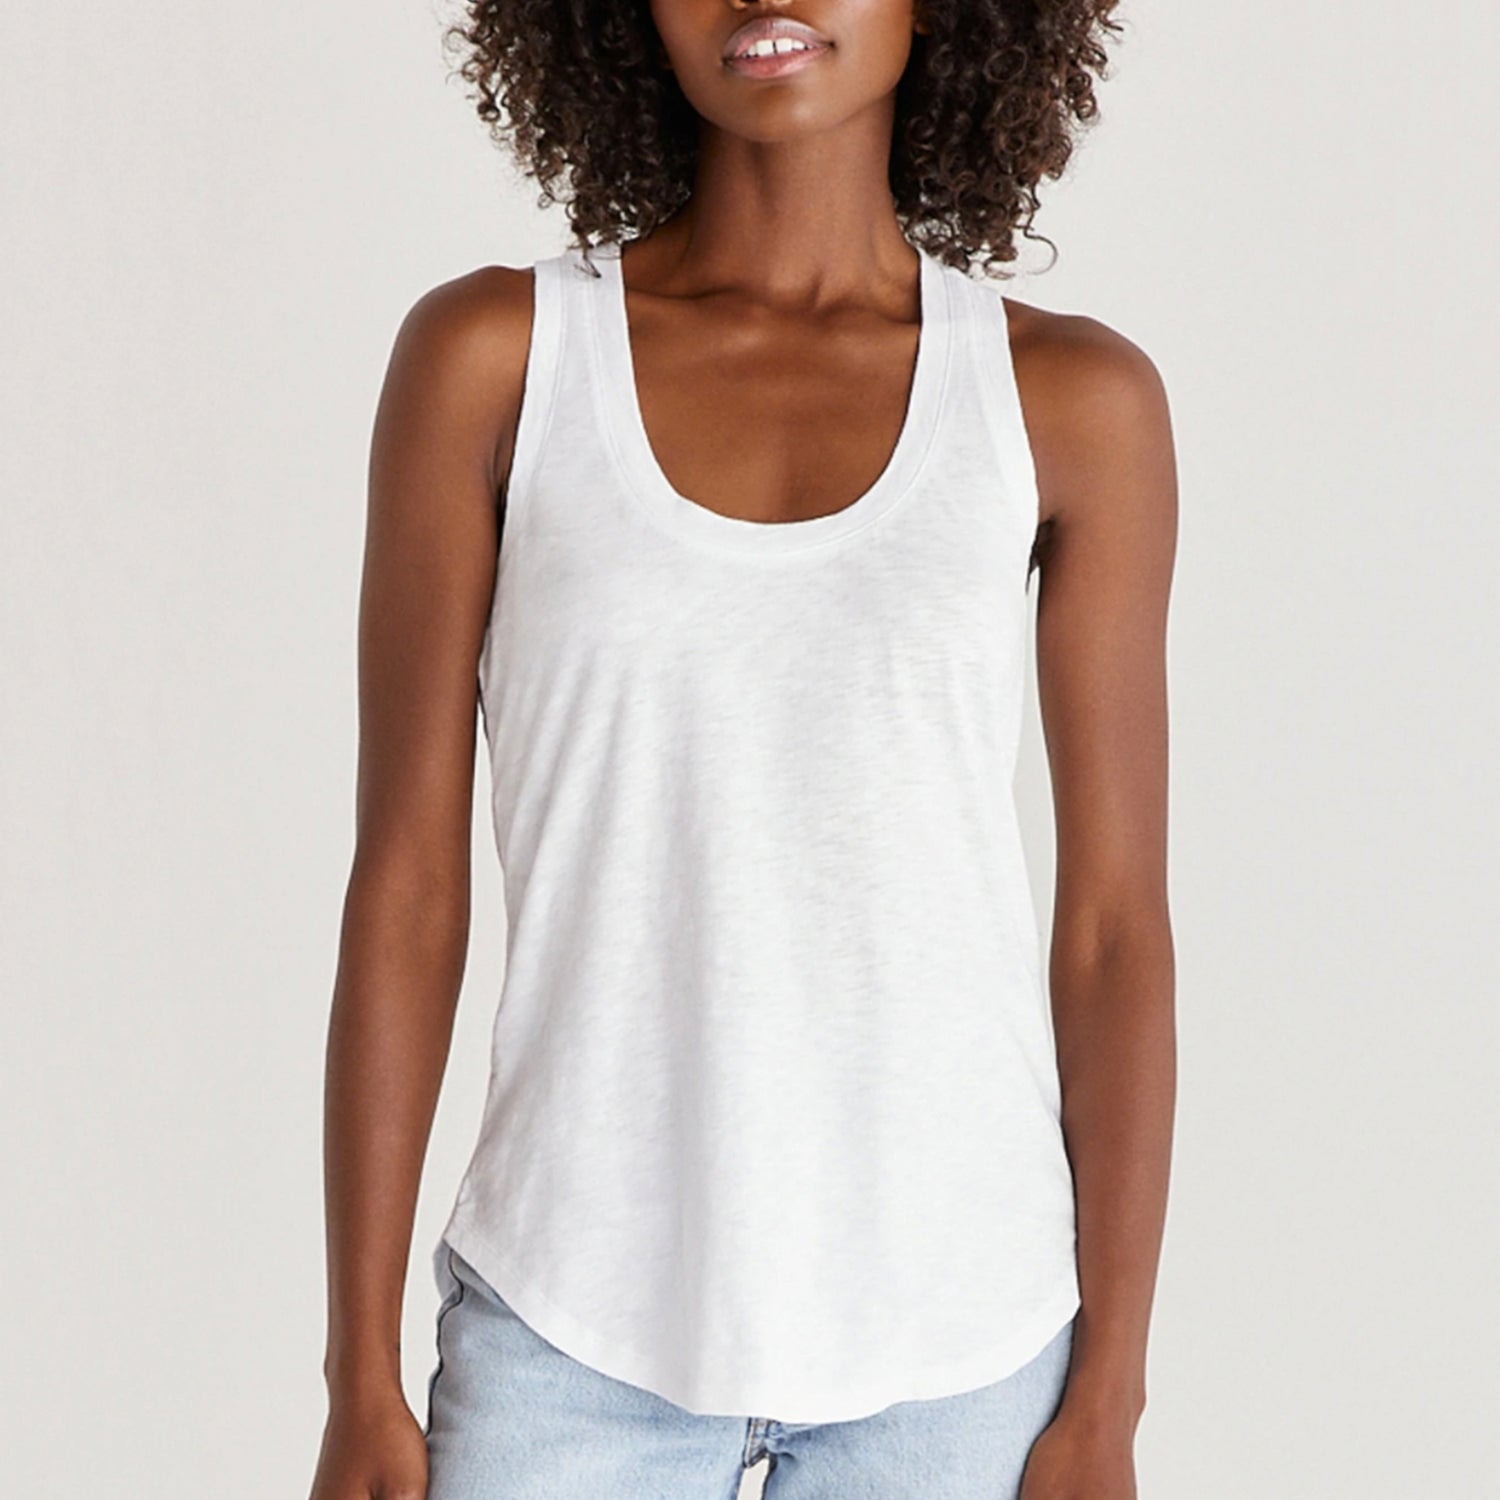 Z Supply Relaxed Slub Tank. Get the comfort you deserve in this tank. This basic tank top is all about mobility and versatility